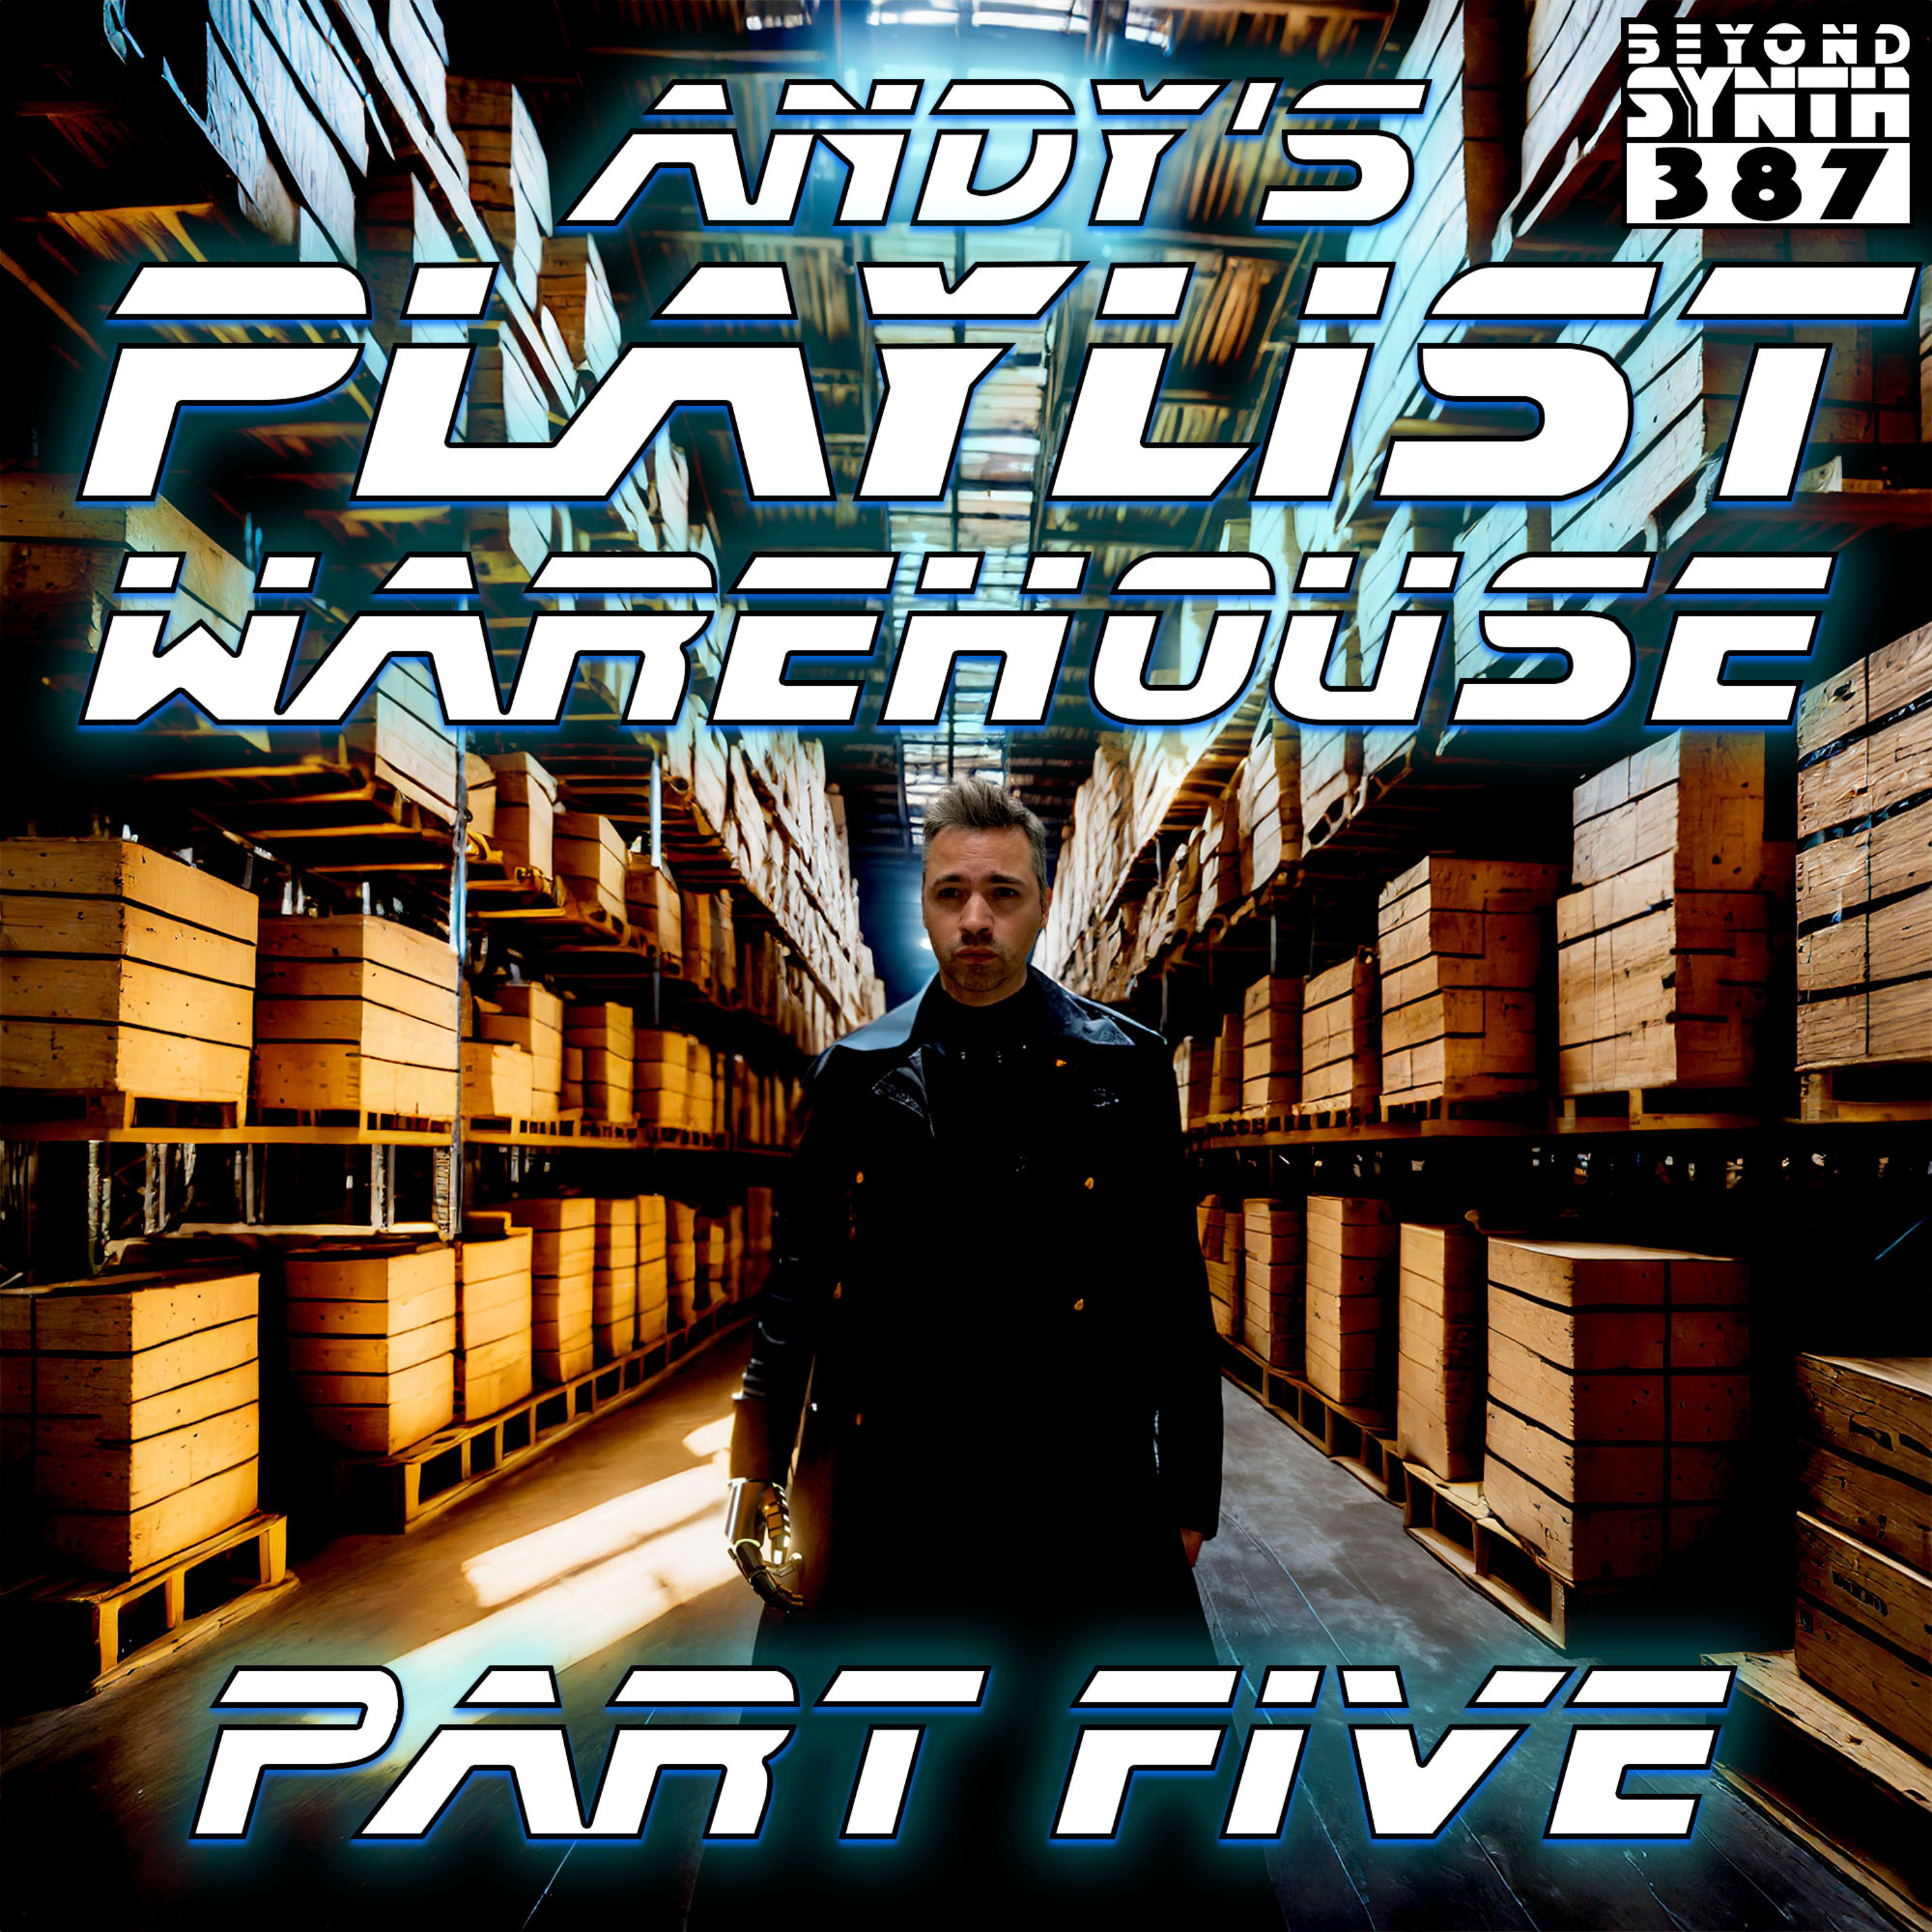 Beyond Synth - 387 - Andy's Playlist Warehouse 05 with Tyber83, Skye Wolff, and Binkley